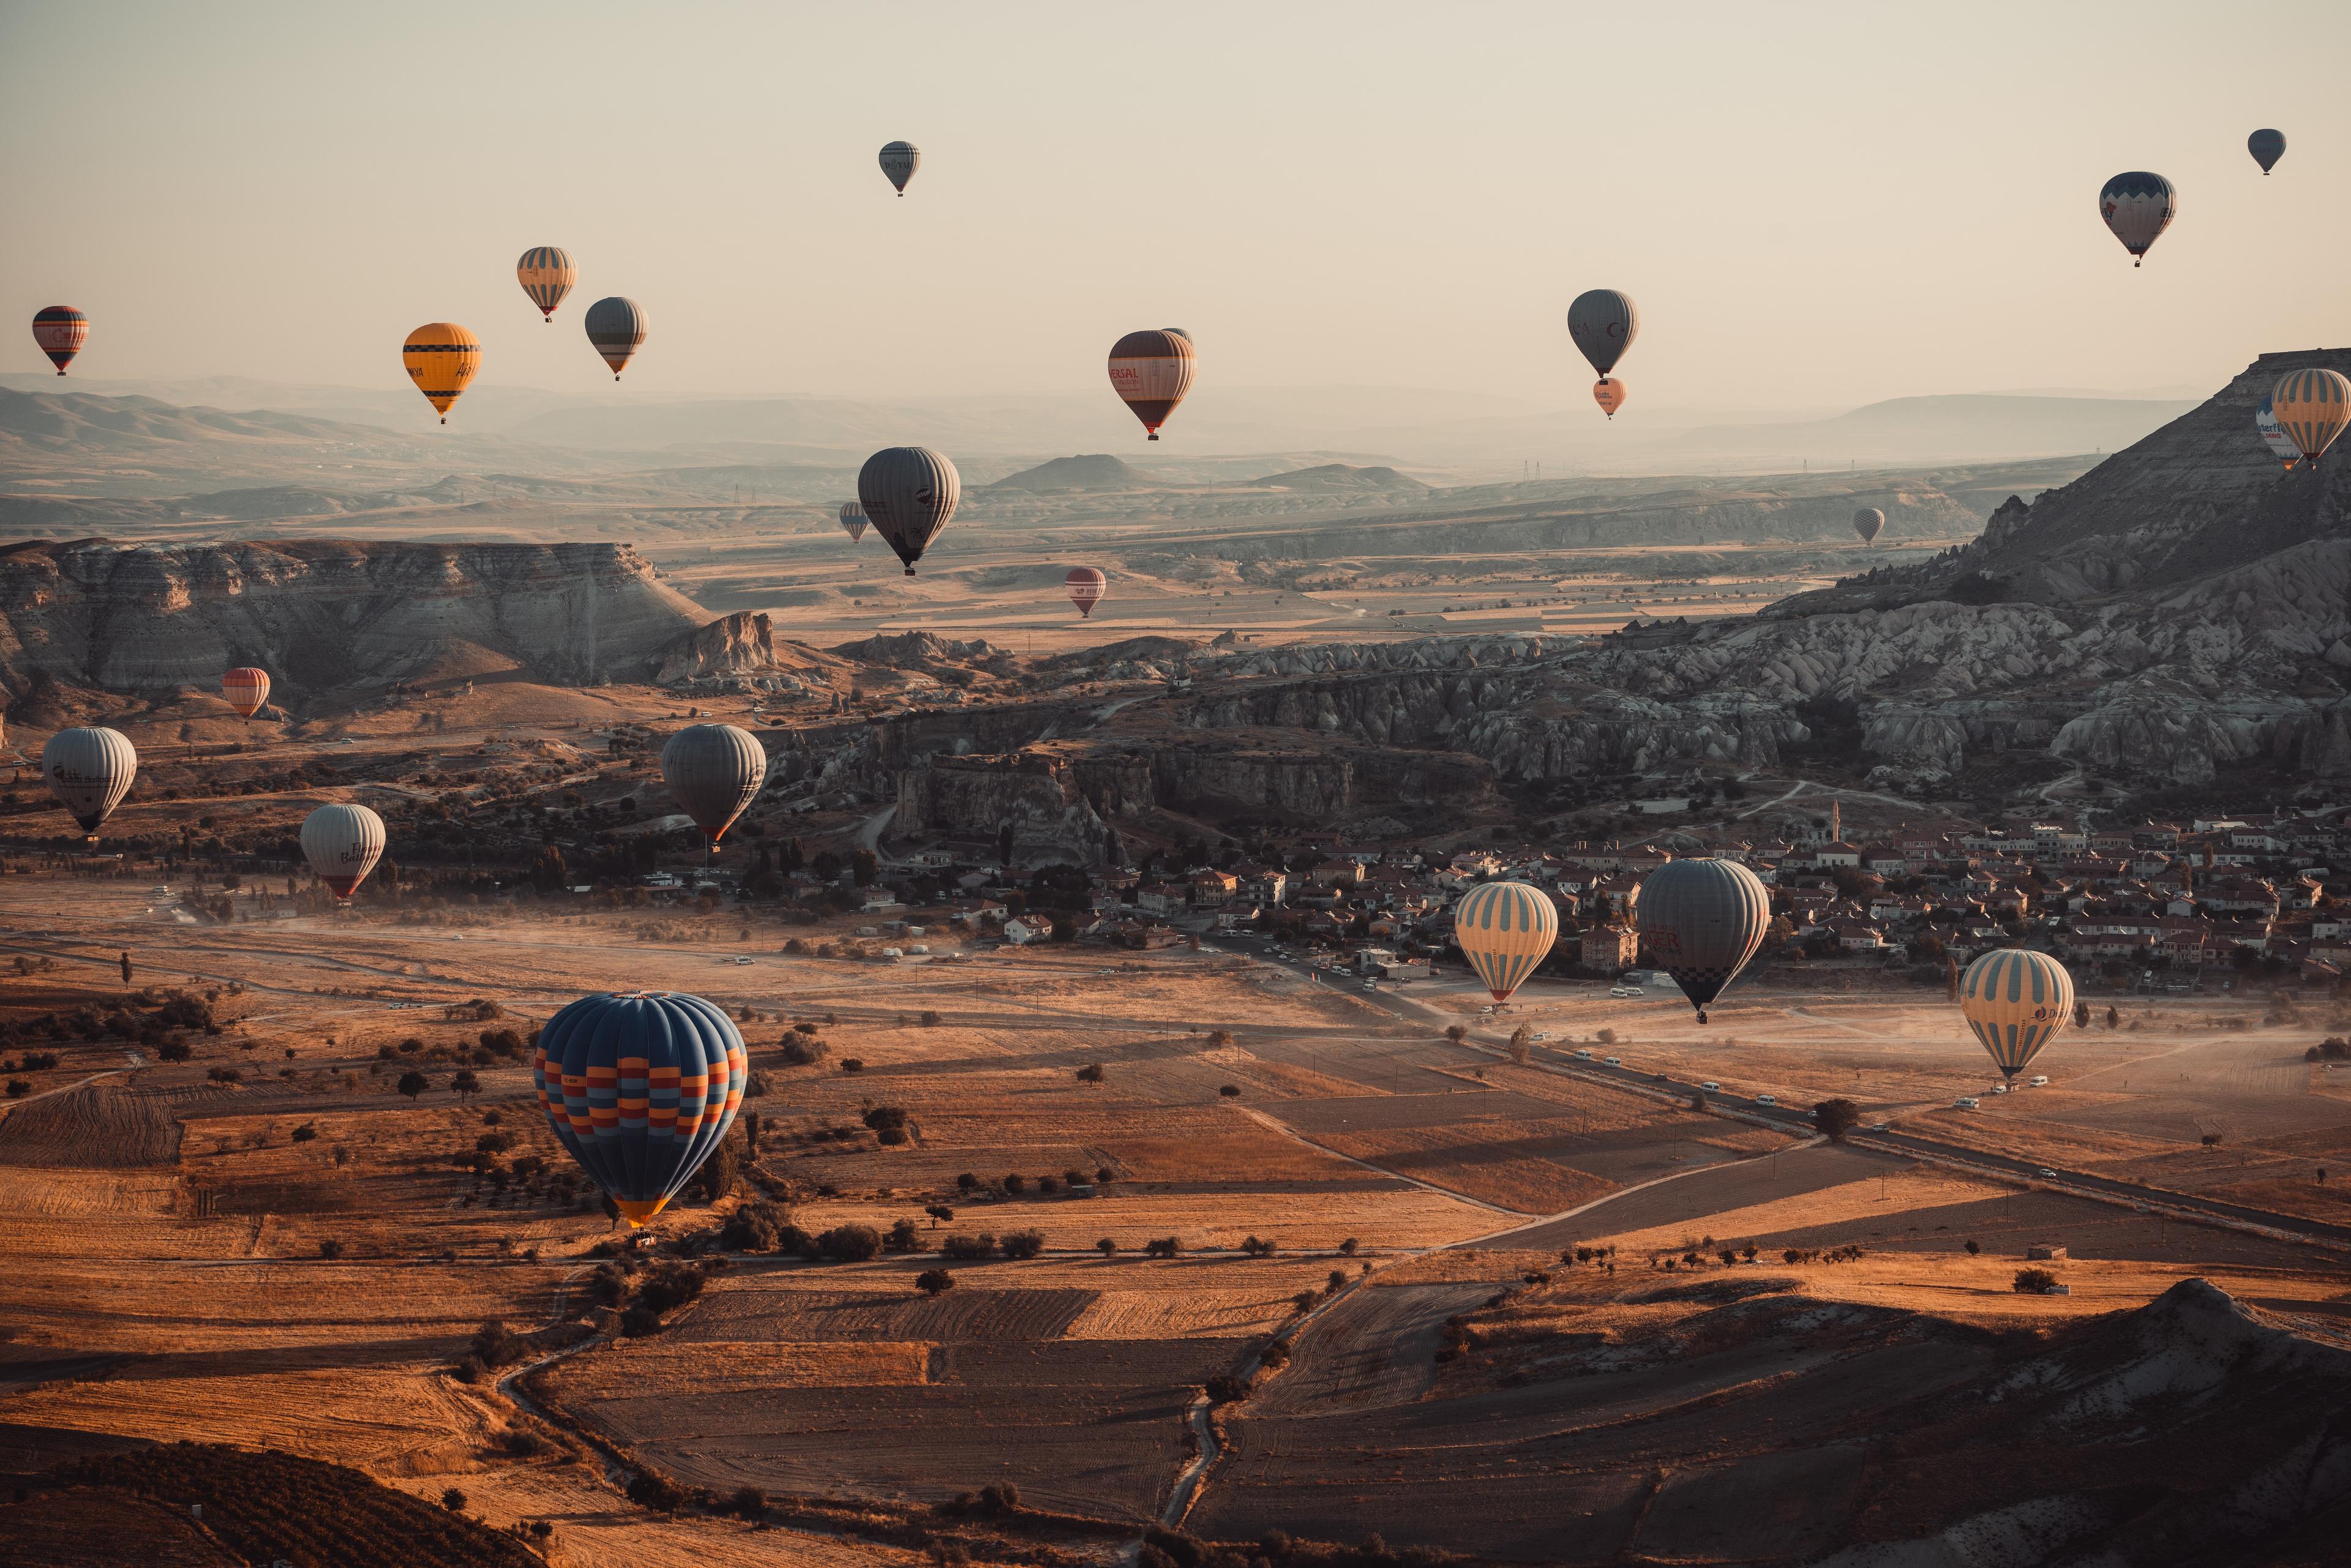 Everything you need to know about Hot Air Ballooning in Cappadocia